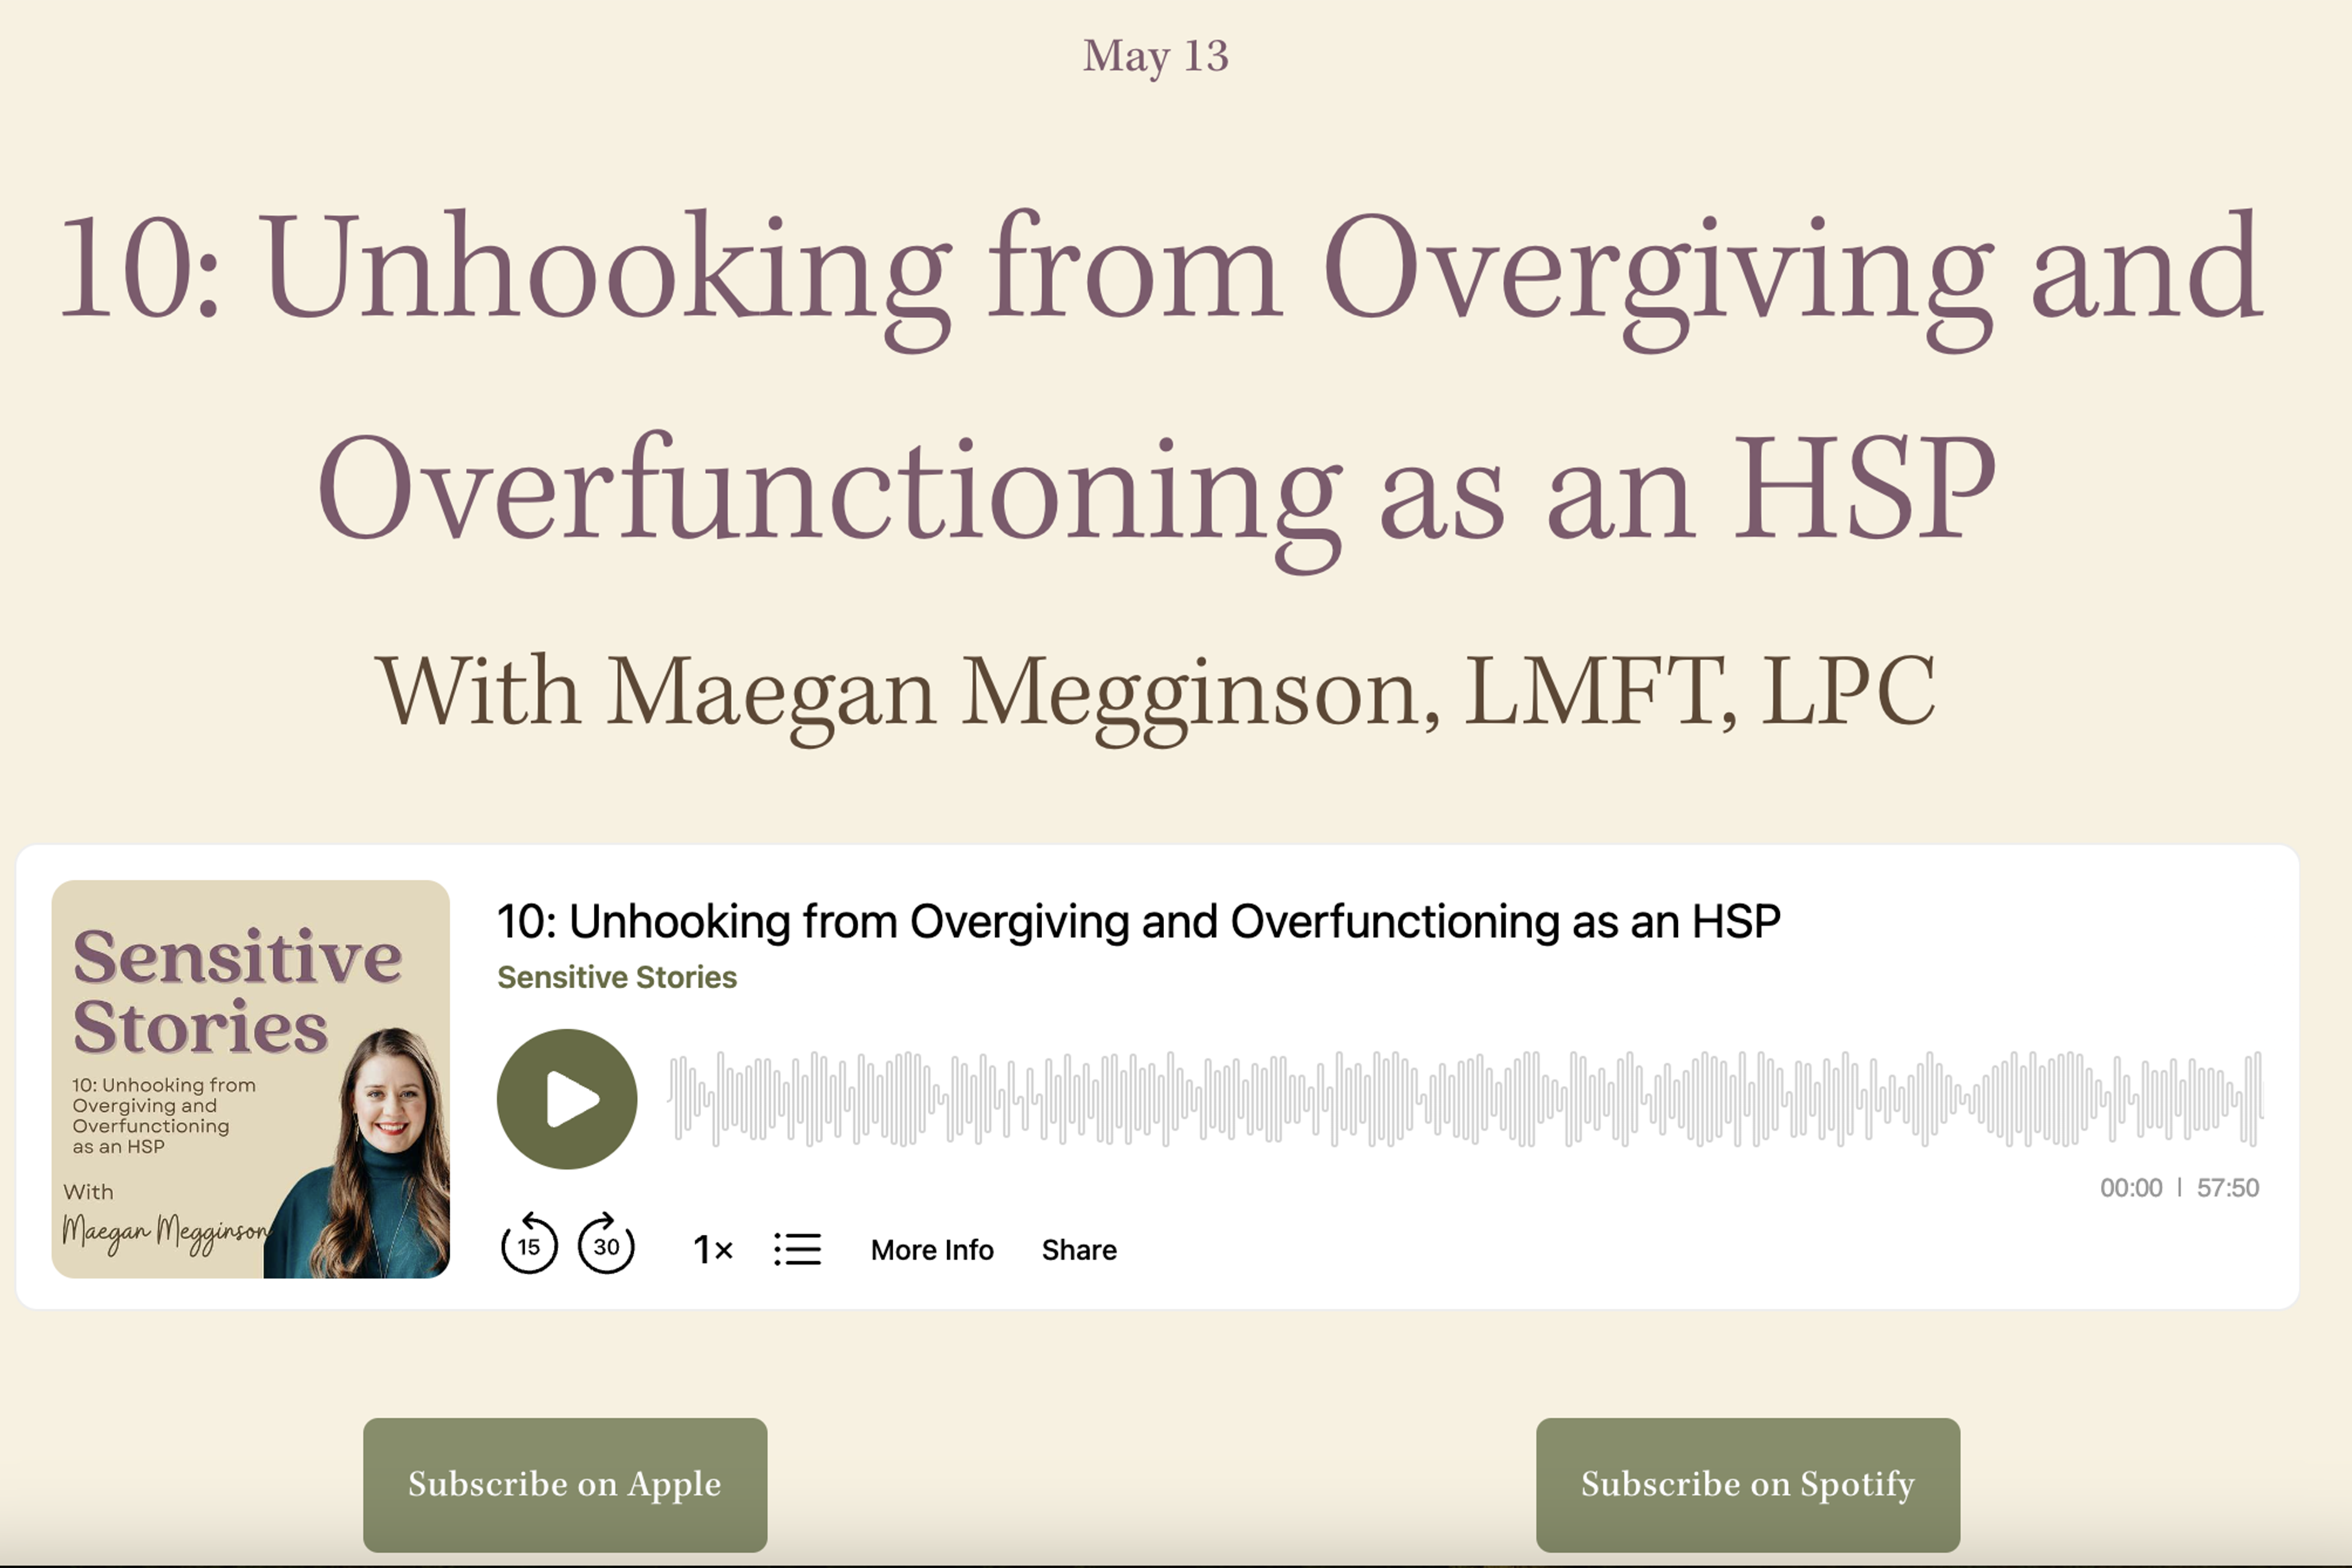 Image is a promo graphic for Sensitive Stories podcast and features a headshot of Maegan, a white woman with long brown hair and a green turtleneck shirt, and the words "Unhooking from Overgiving and Overfunctioning as an HSP."